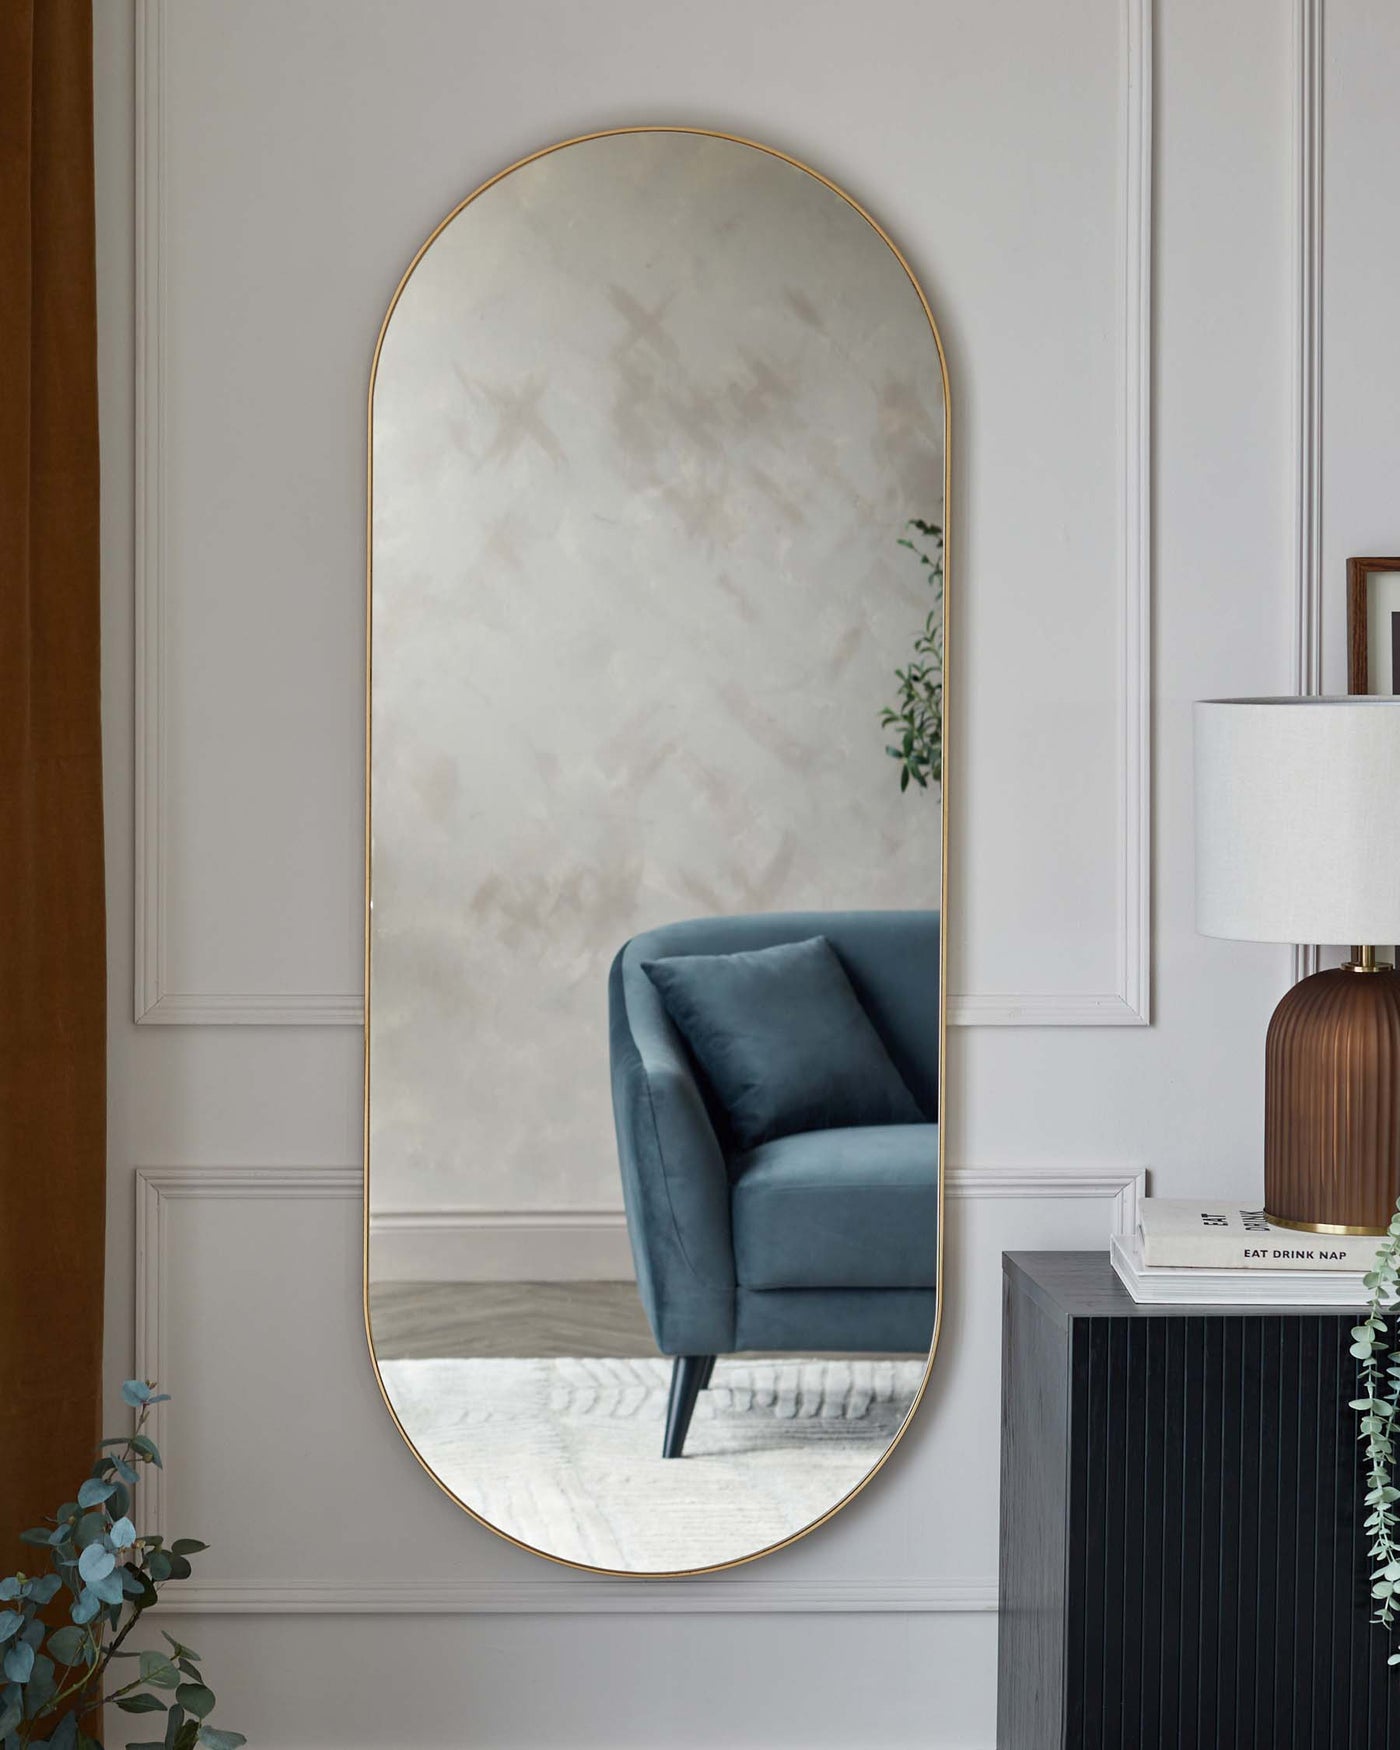 Elegant modern furniture in a chic interior, featuring a sleek, black wood cabinet with vertical grooves and a plush blue velvet armchair with a high back and angled metal legs, complemented by a tall, arched floor mirror with a slim gold frame.